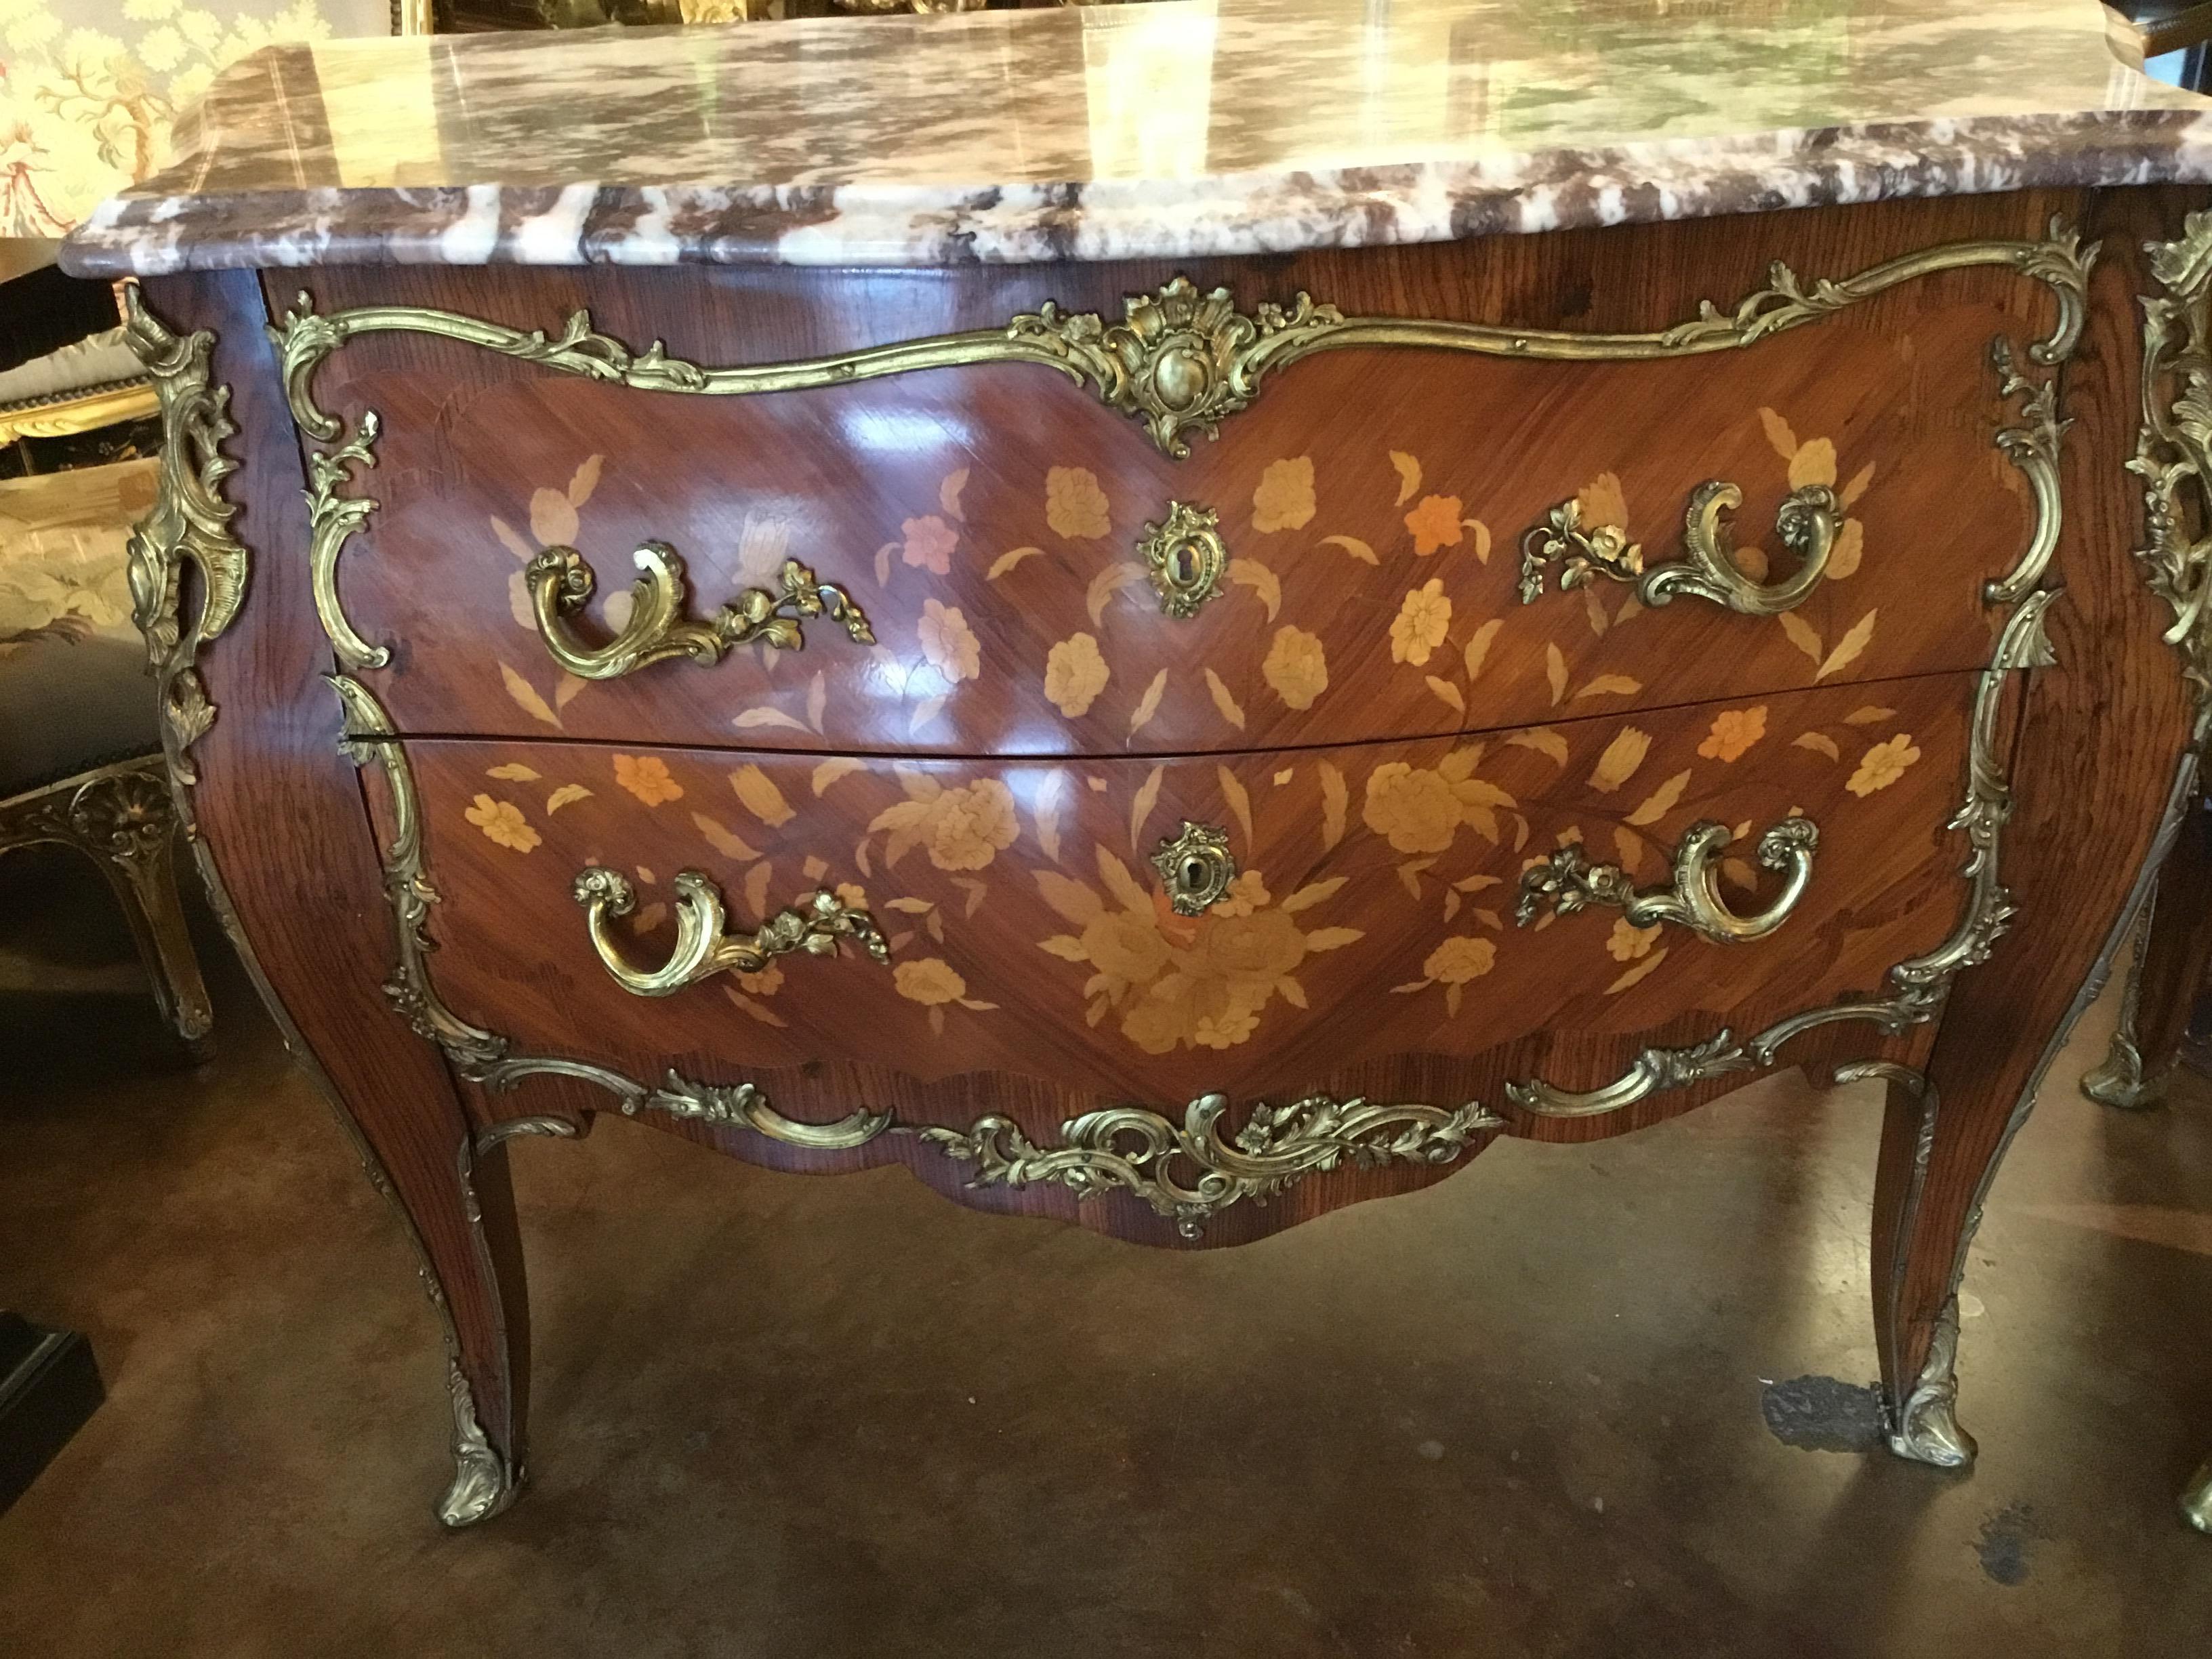 Exquisite pair of French commodes with bronze dore mounts and marquetry inlay.
Bombe form with graceful curved leg ending in sabots. The cabinets are made of
Kingwood and have satinwood inlay. The marble tops are beige with pale mauve hues.